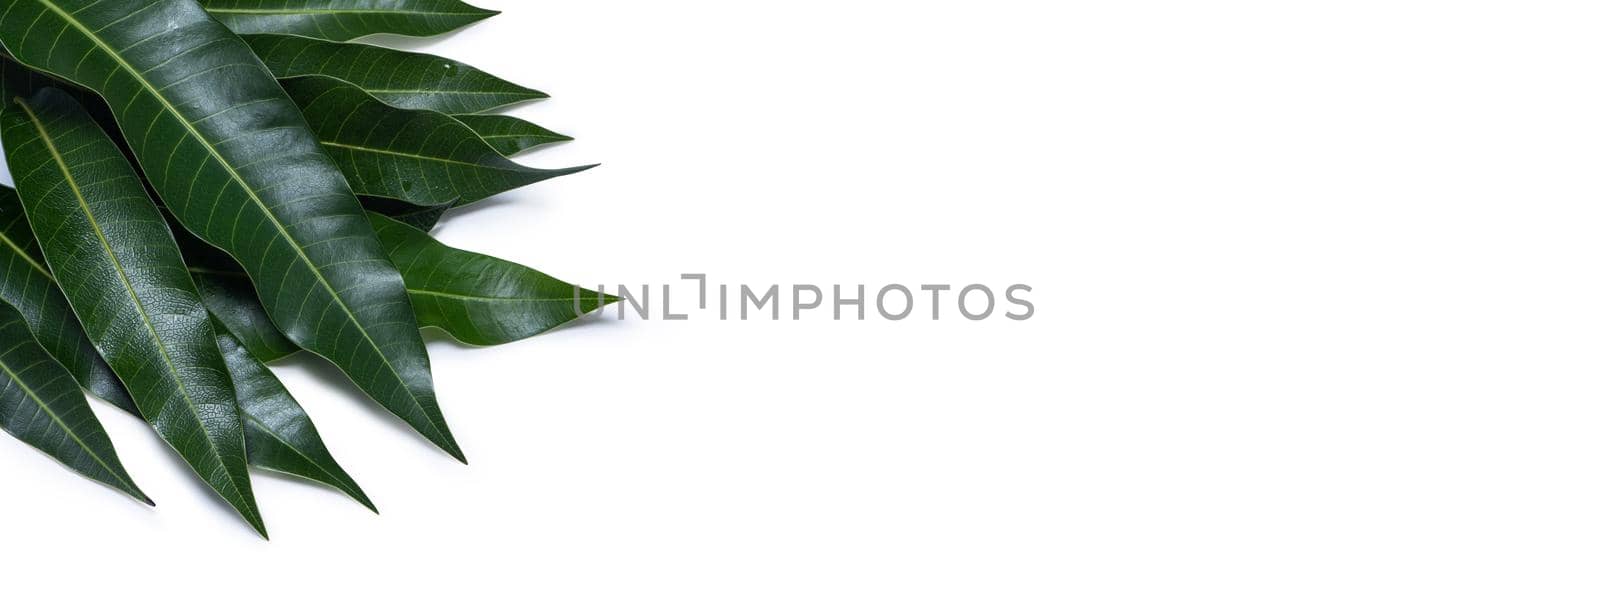 Green fresh mango leaves isolated on white background, beautiful vein texture in detail. Clipping path, cut out, close up, macro. Tropical concept. by ROMIXIMAGE